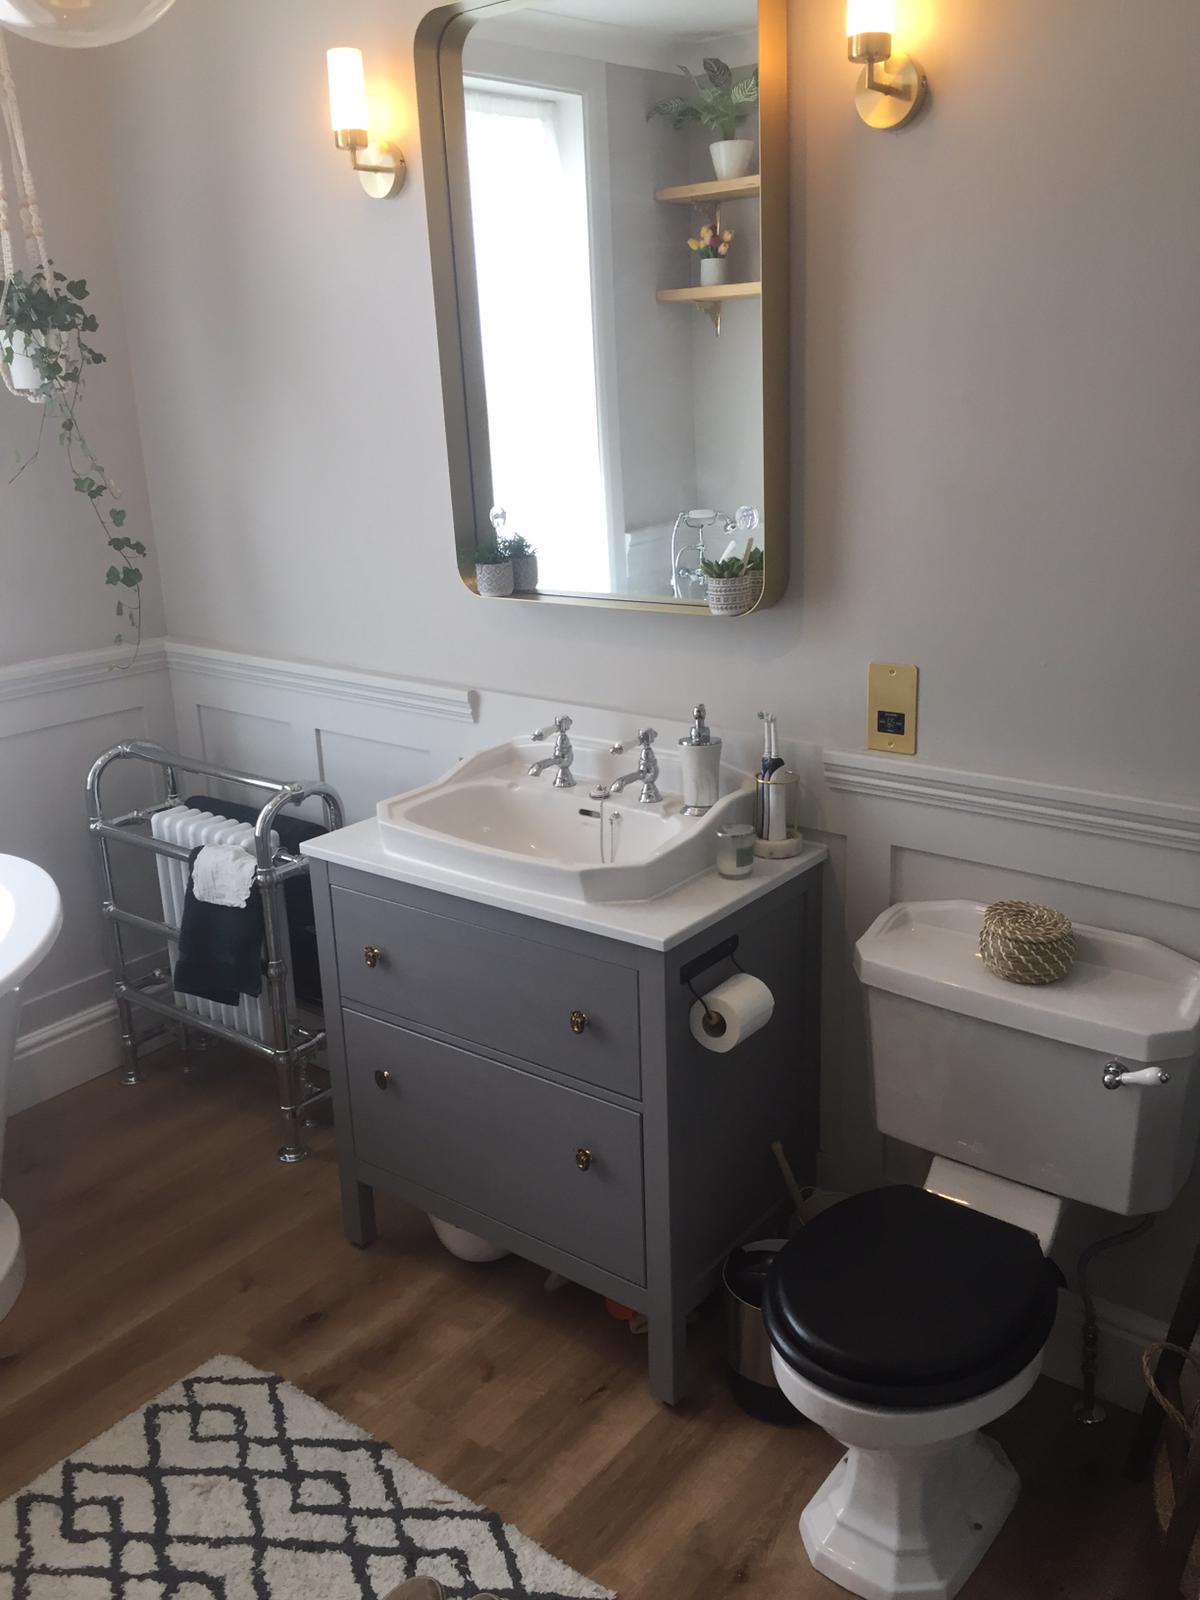 Grey art deco sink, toilet with black seat and towel rail. Large mirror above the sink with two lights.